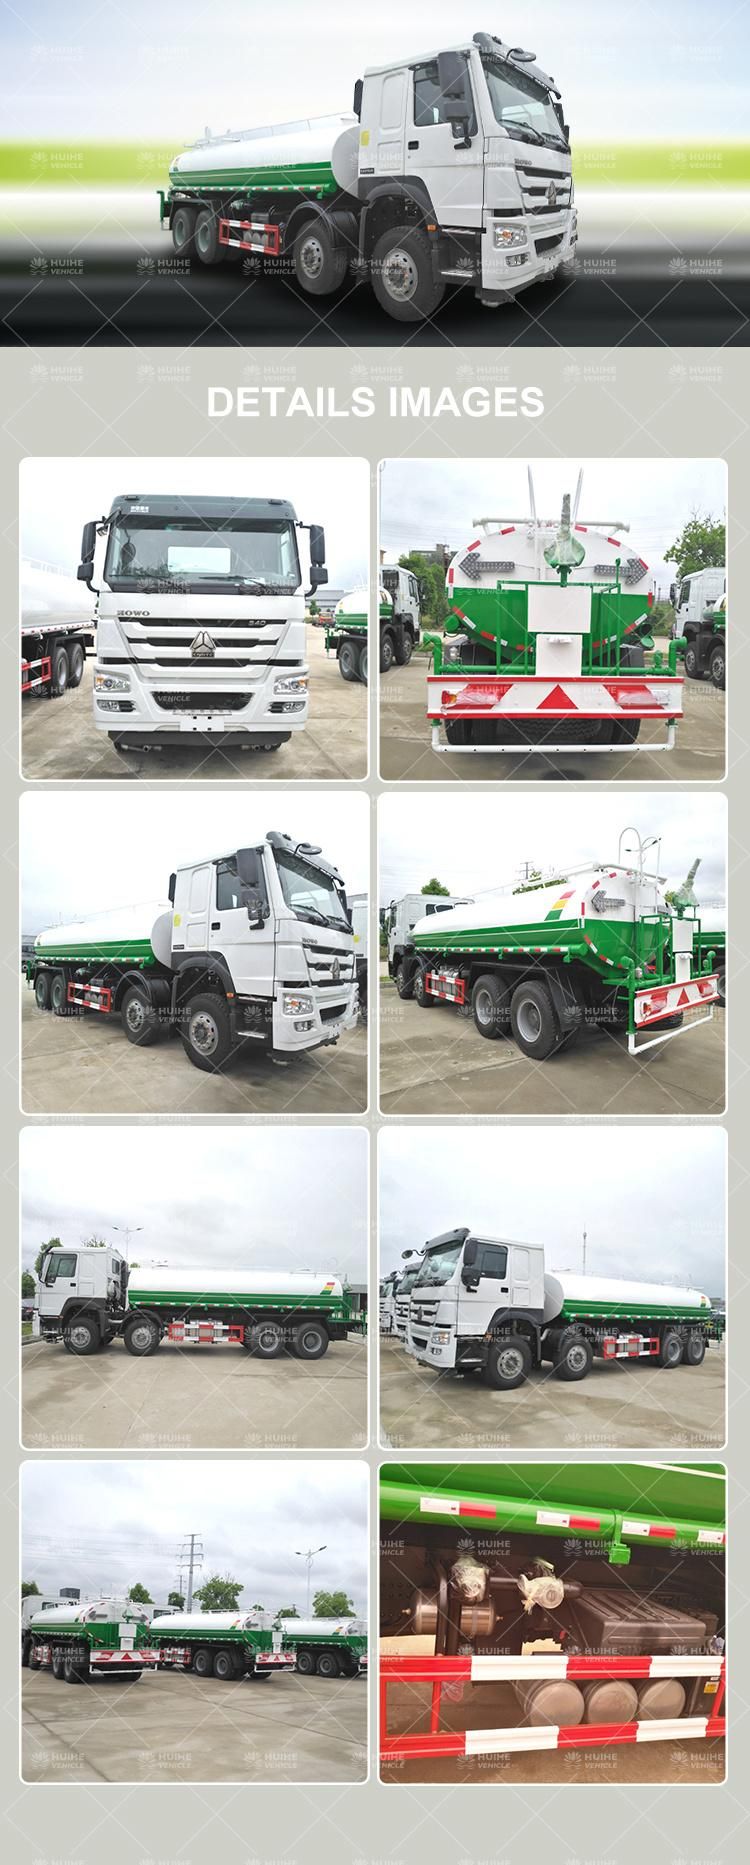 290HP /336HP Sino HOWO 20000 Liters Heavy Special Water Tanker Truck Trucks with Water Tankers